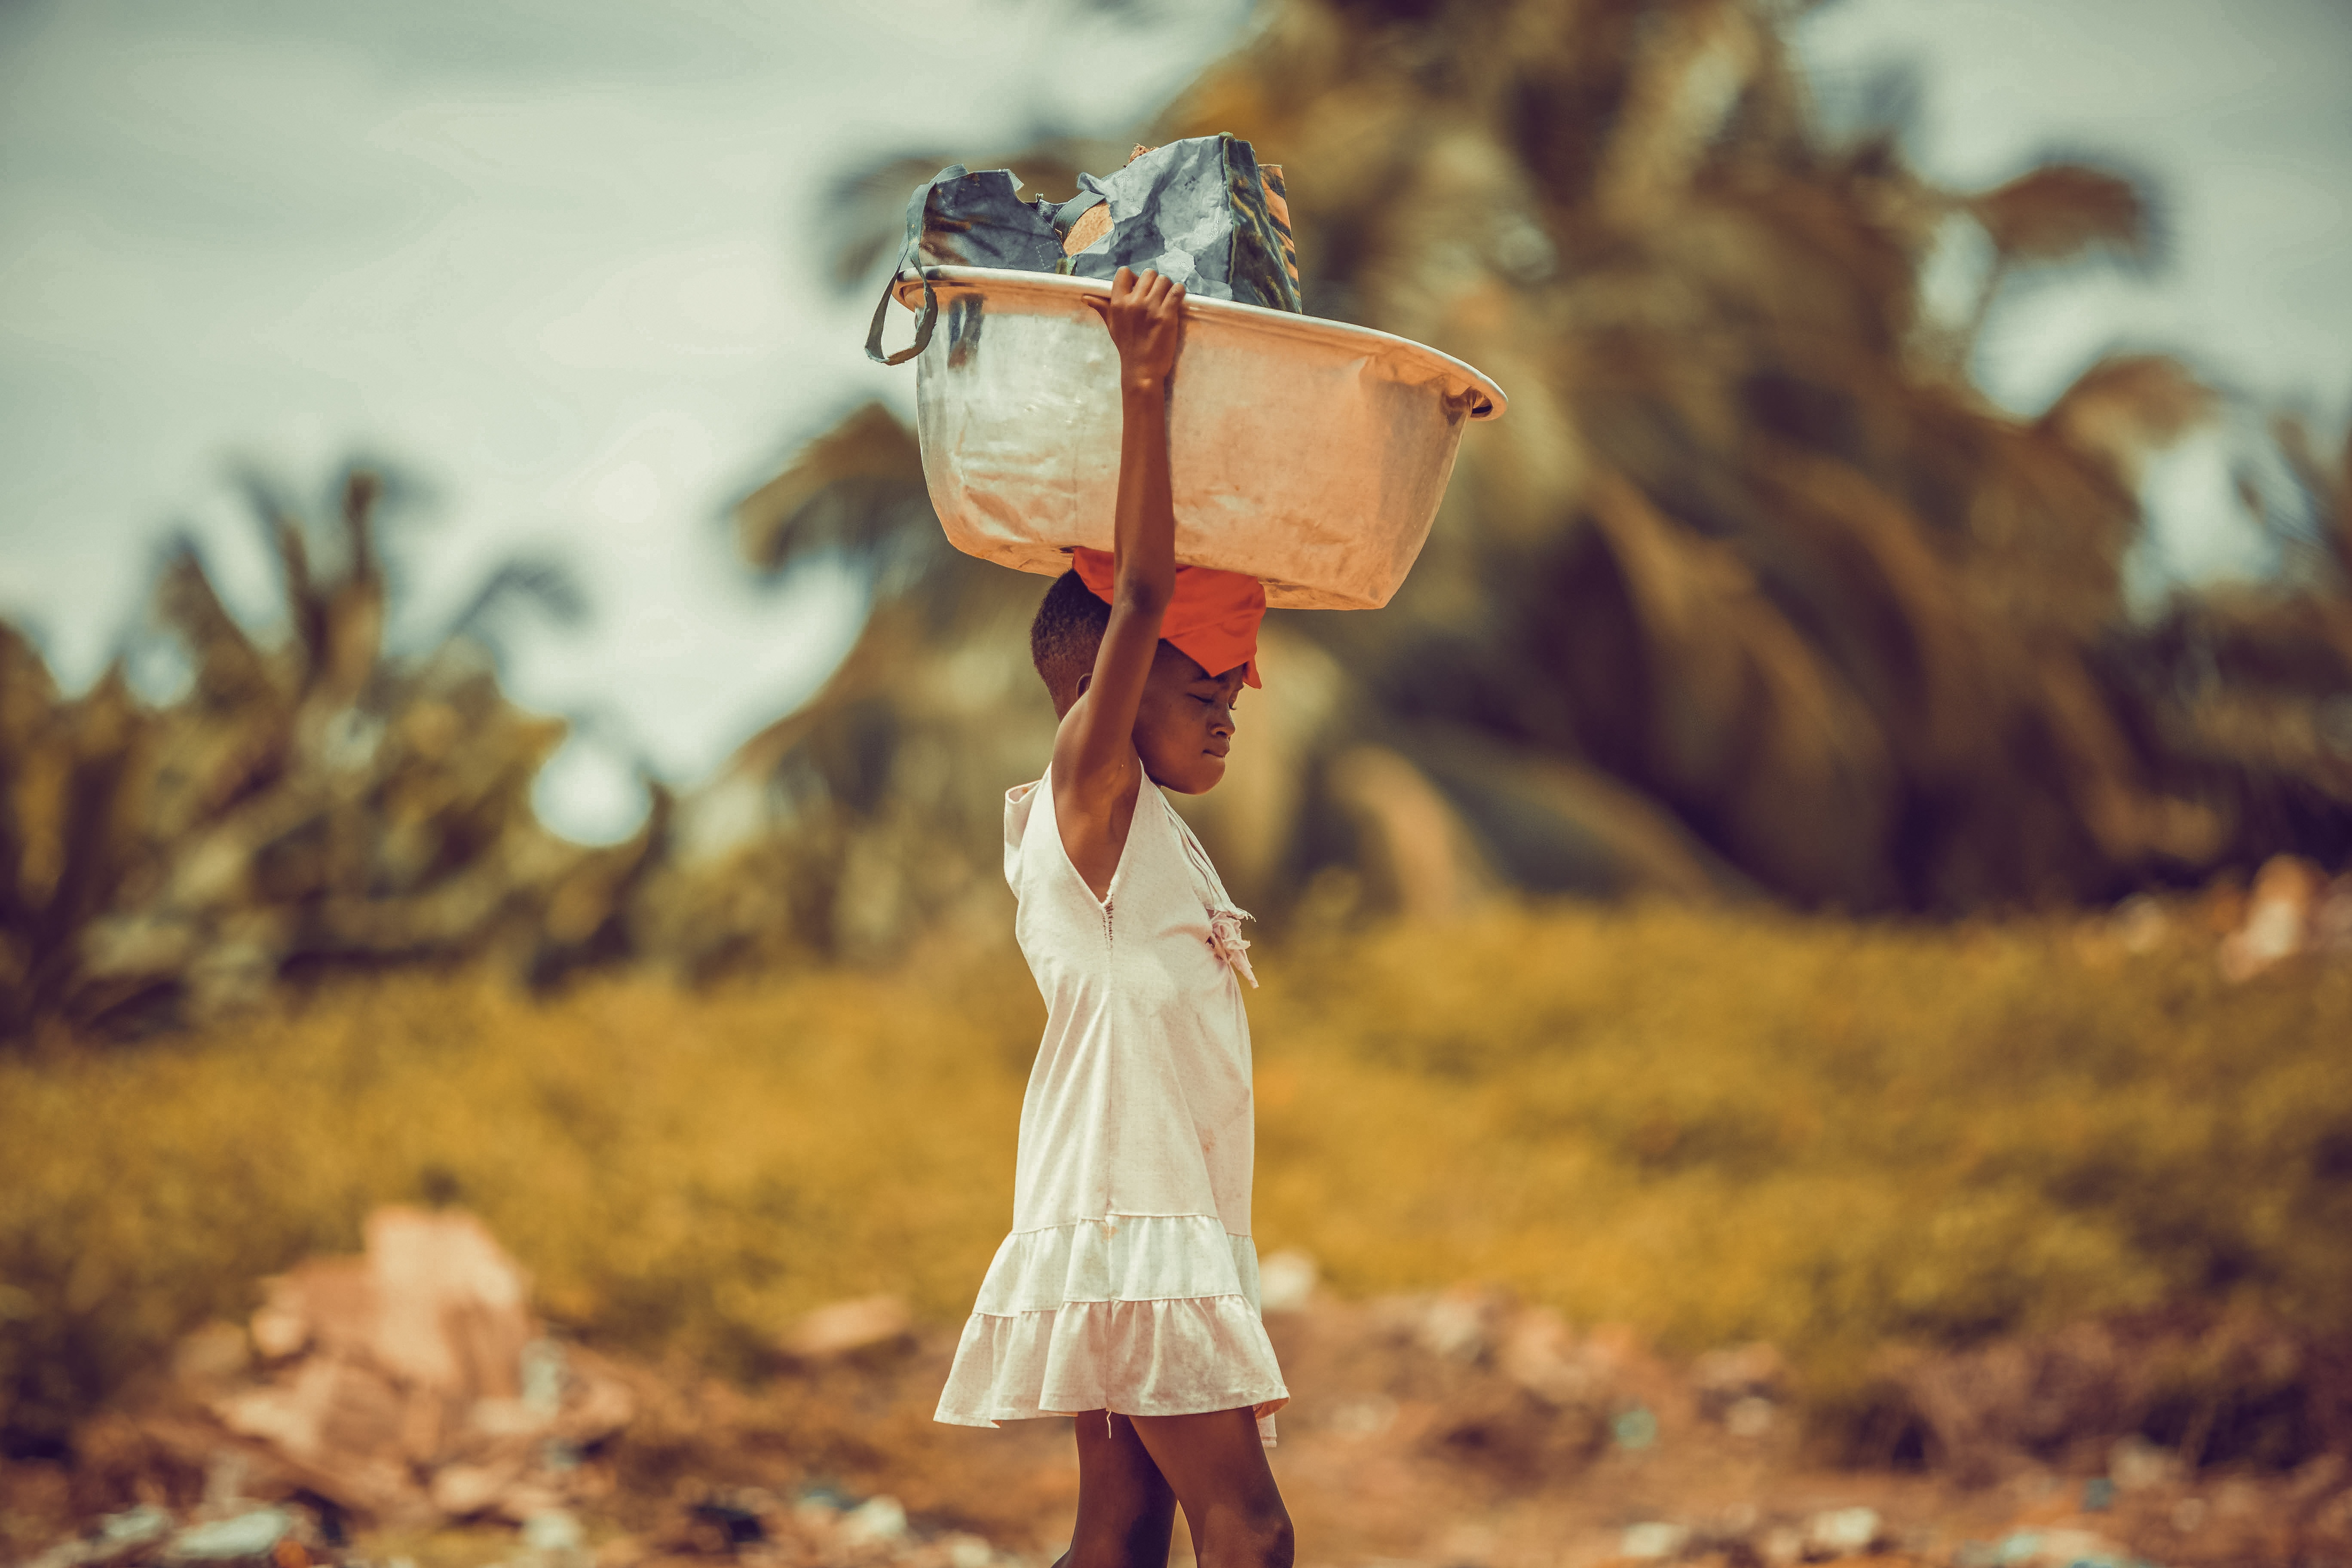 African child carrying basket on head